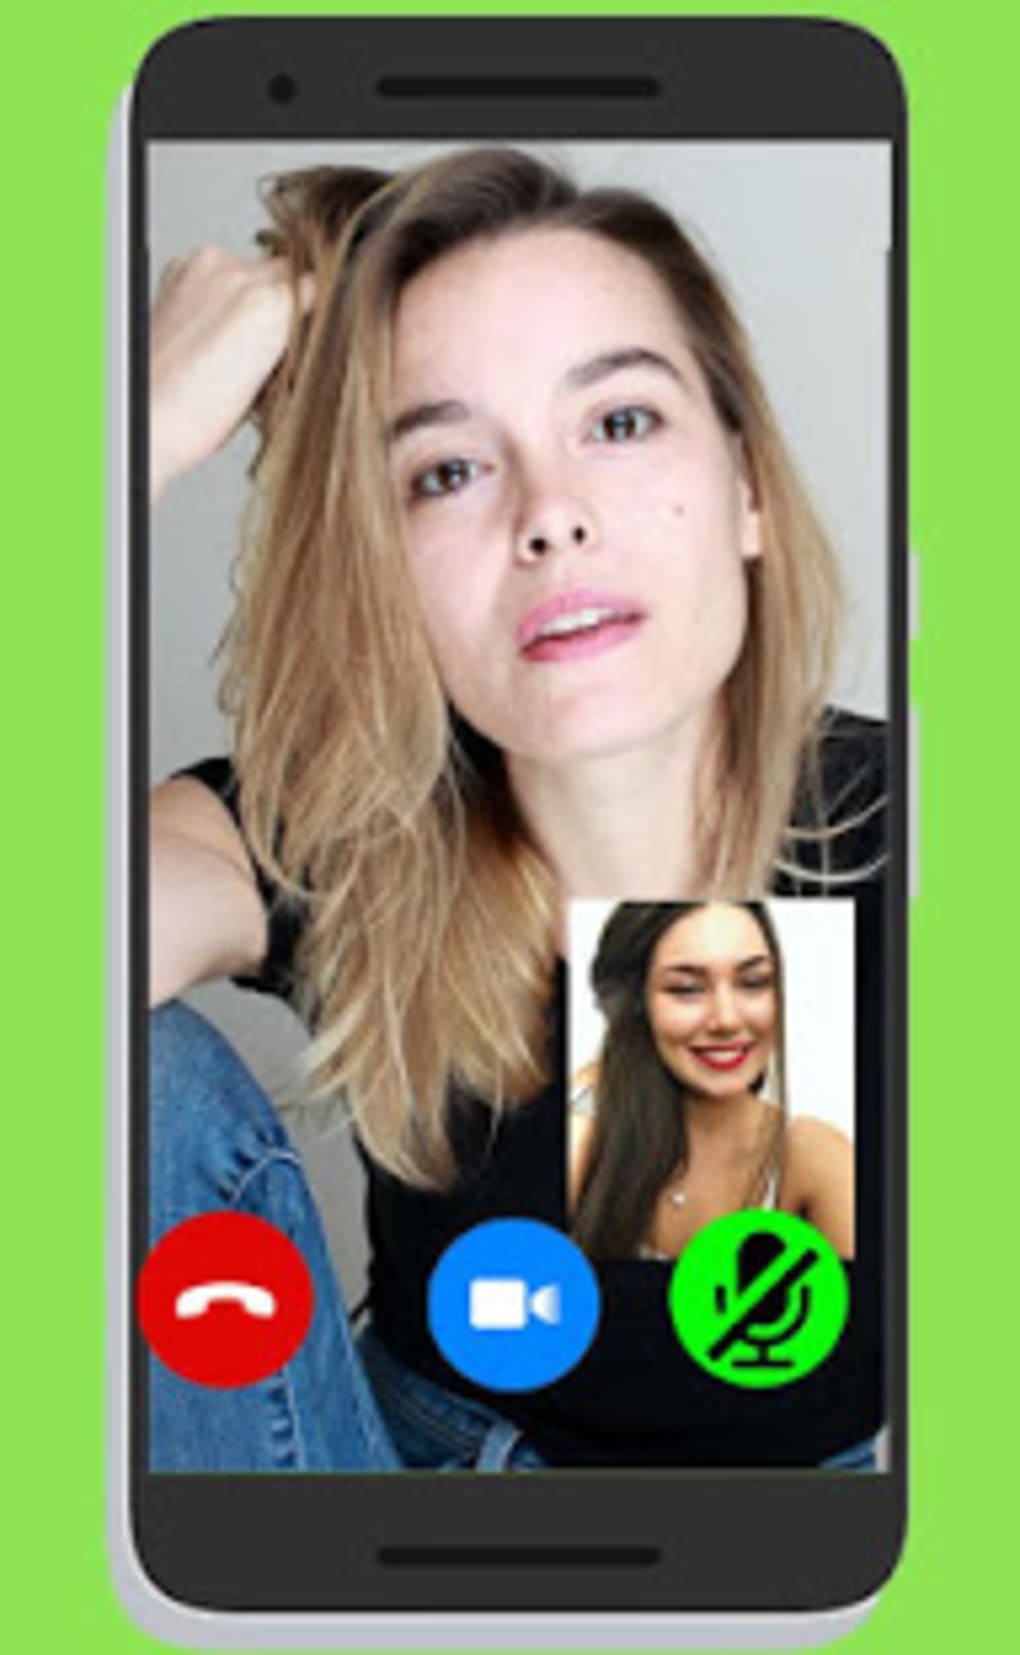 video chat with strangers free app